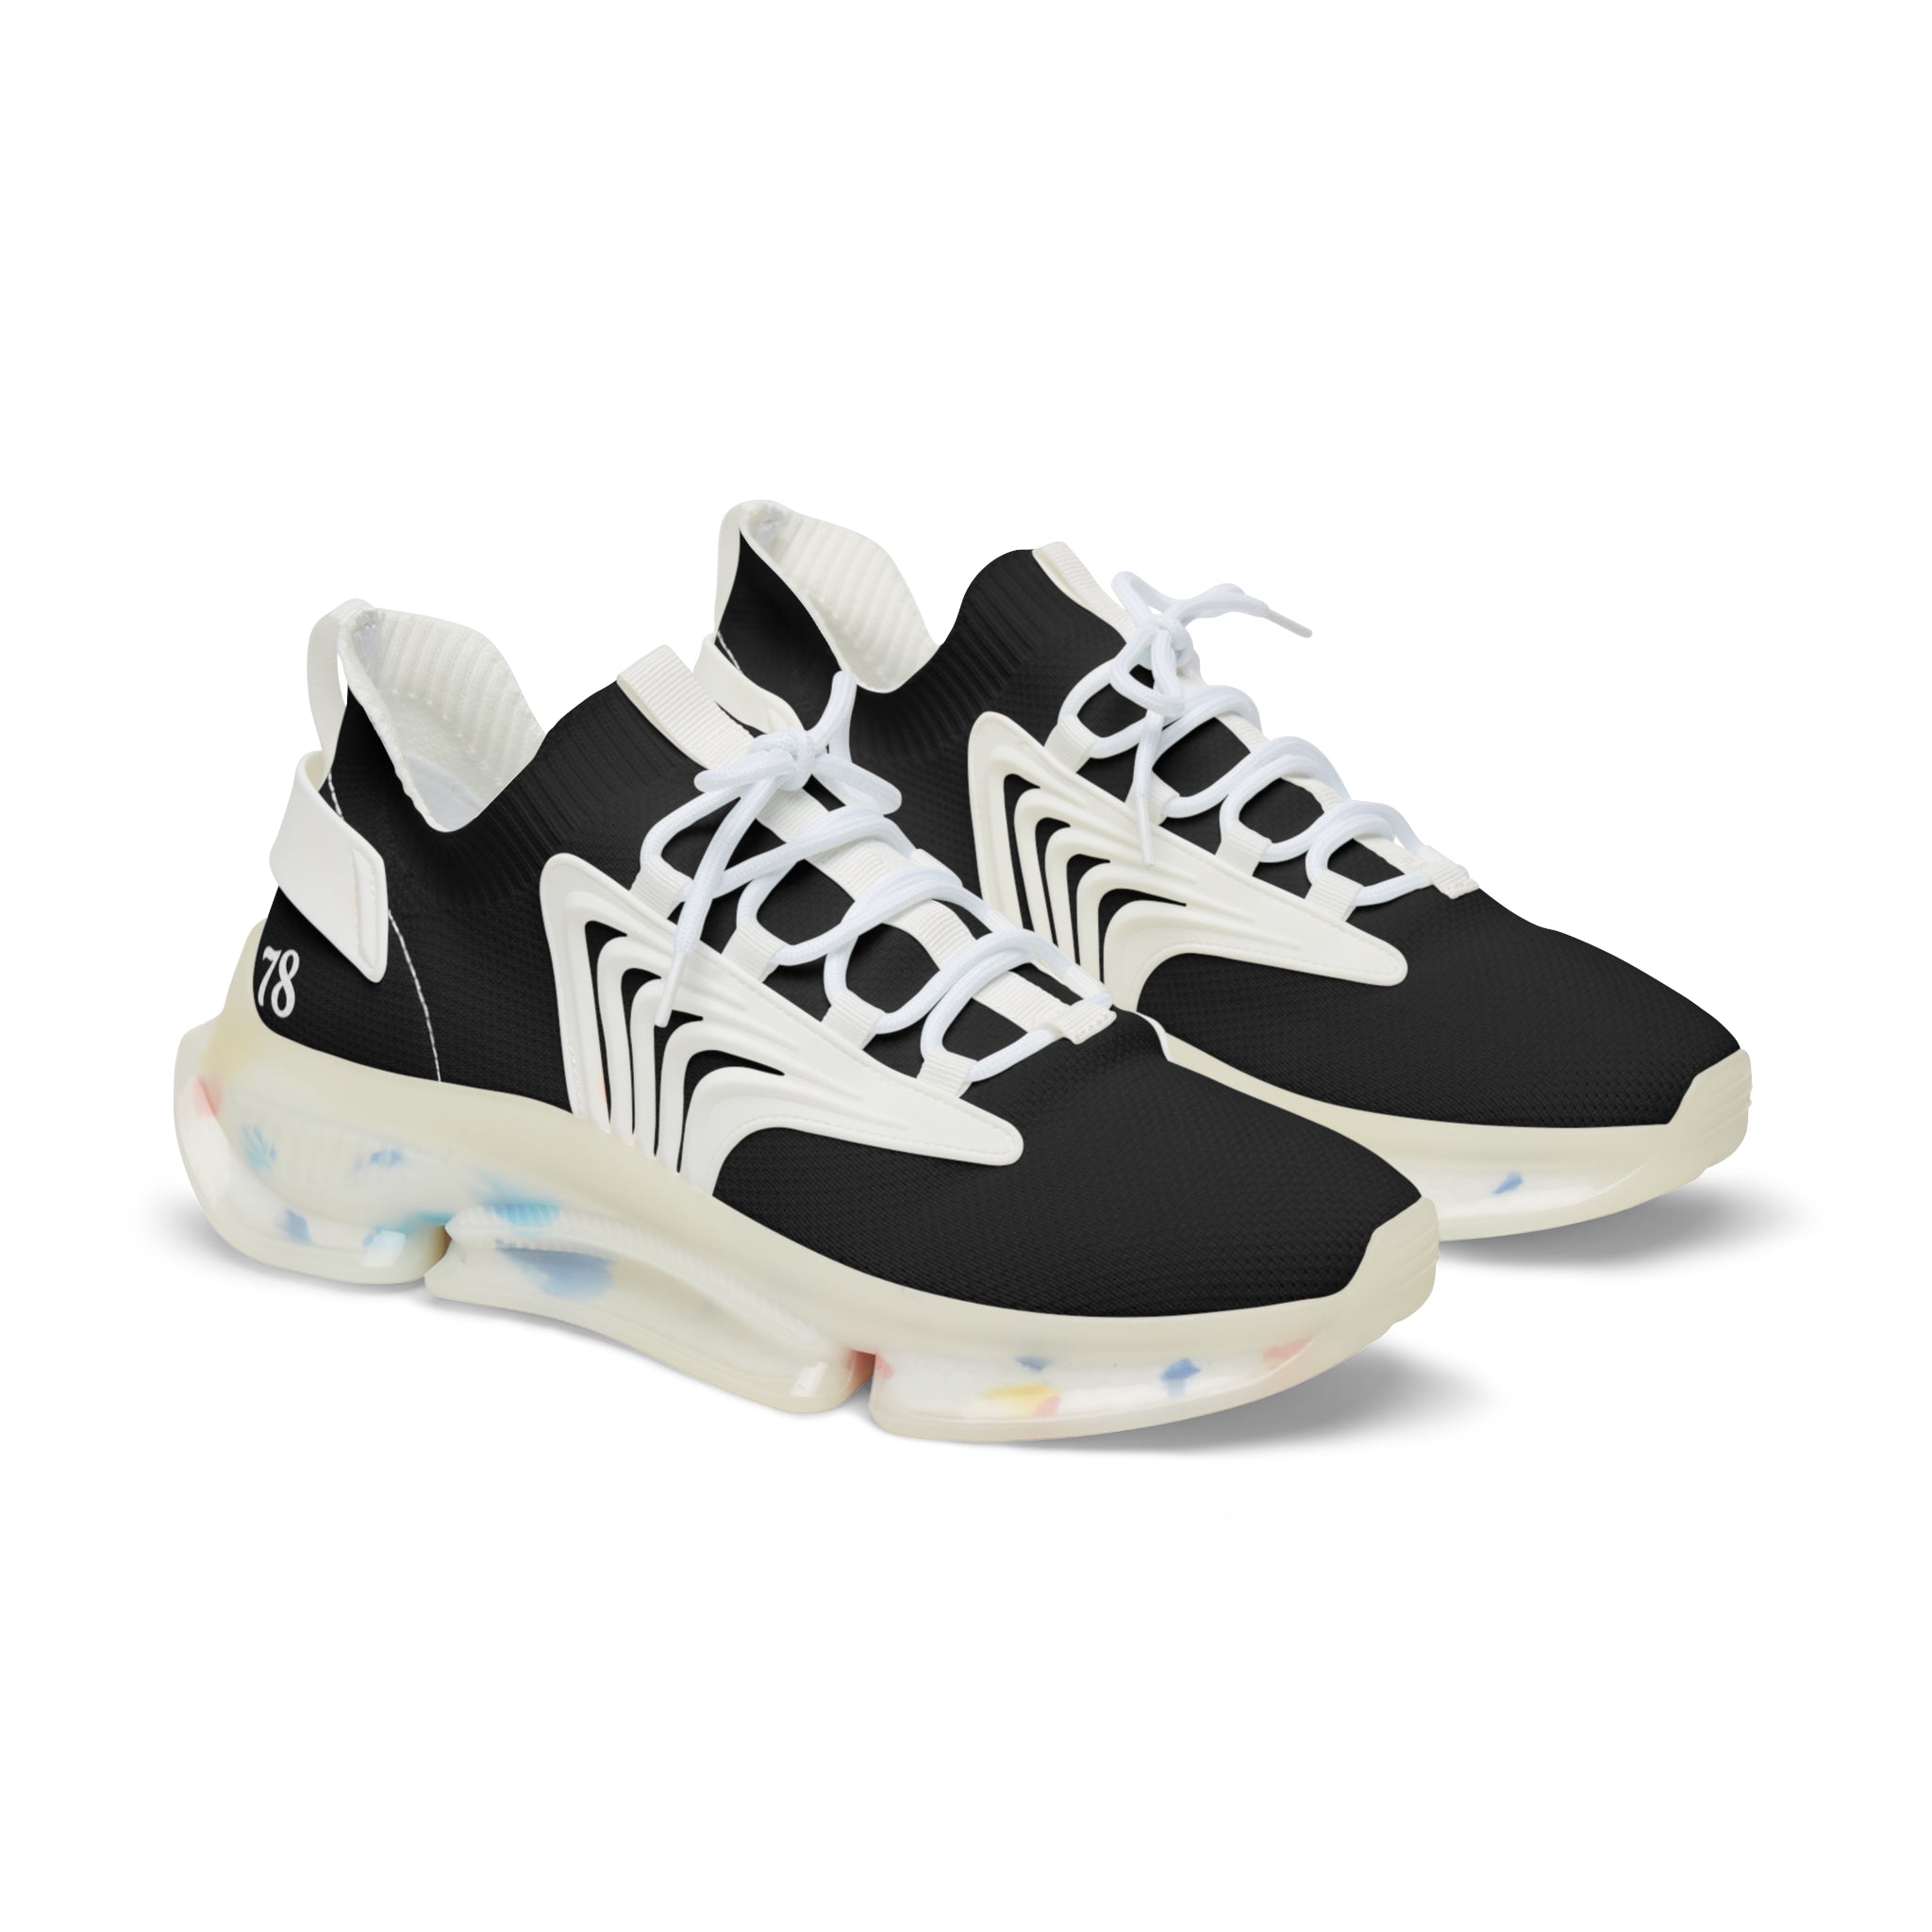 Durdy drips 78 Sports Sneakers